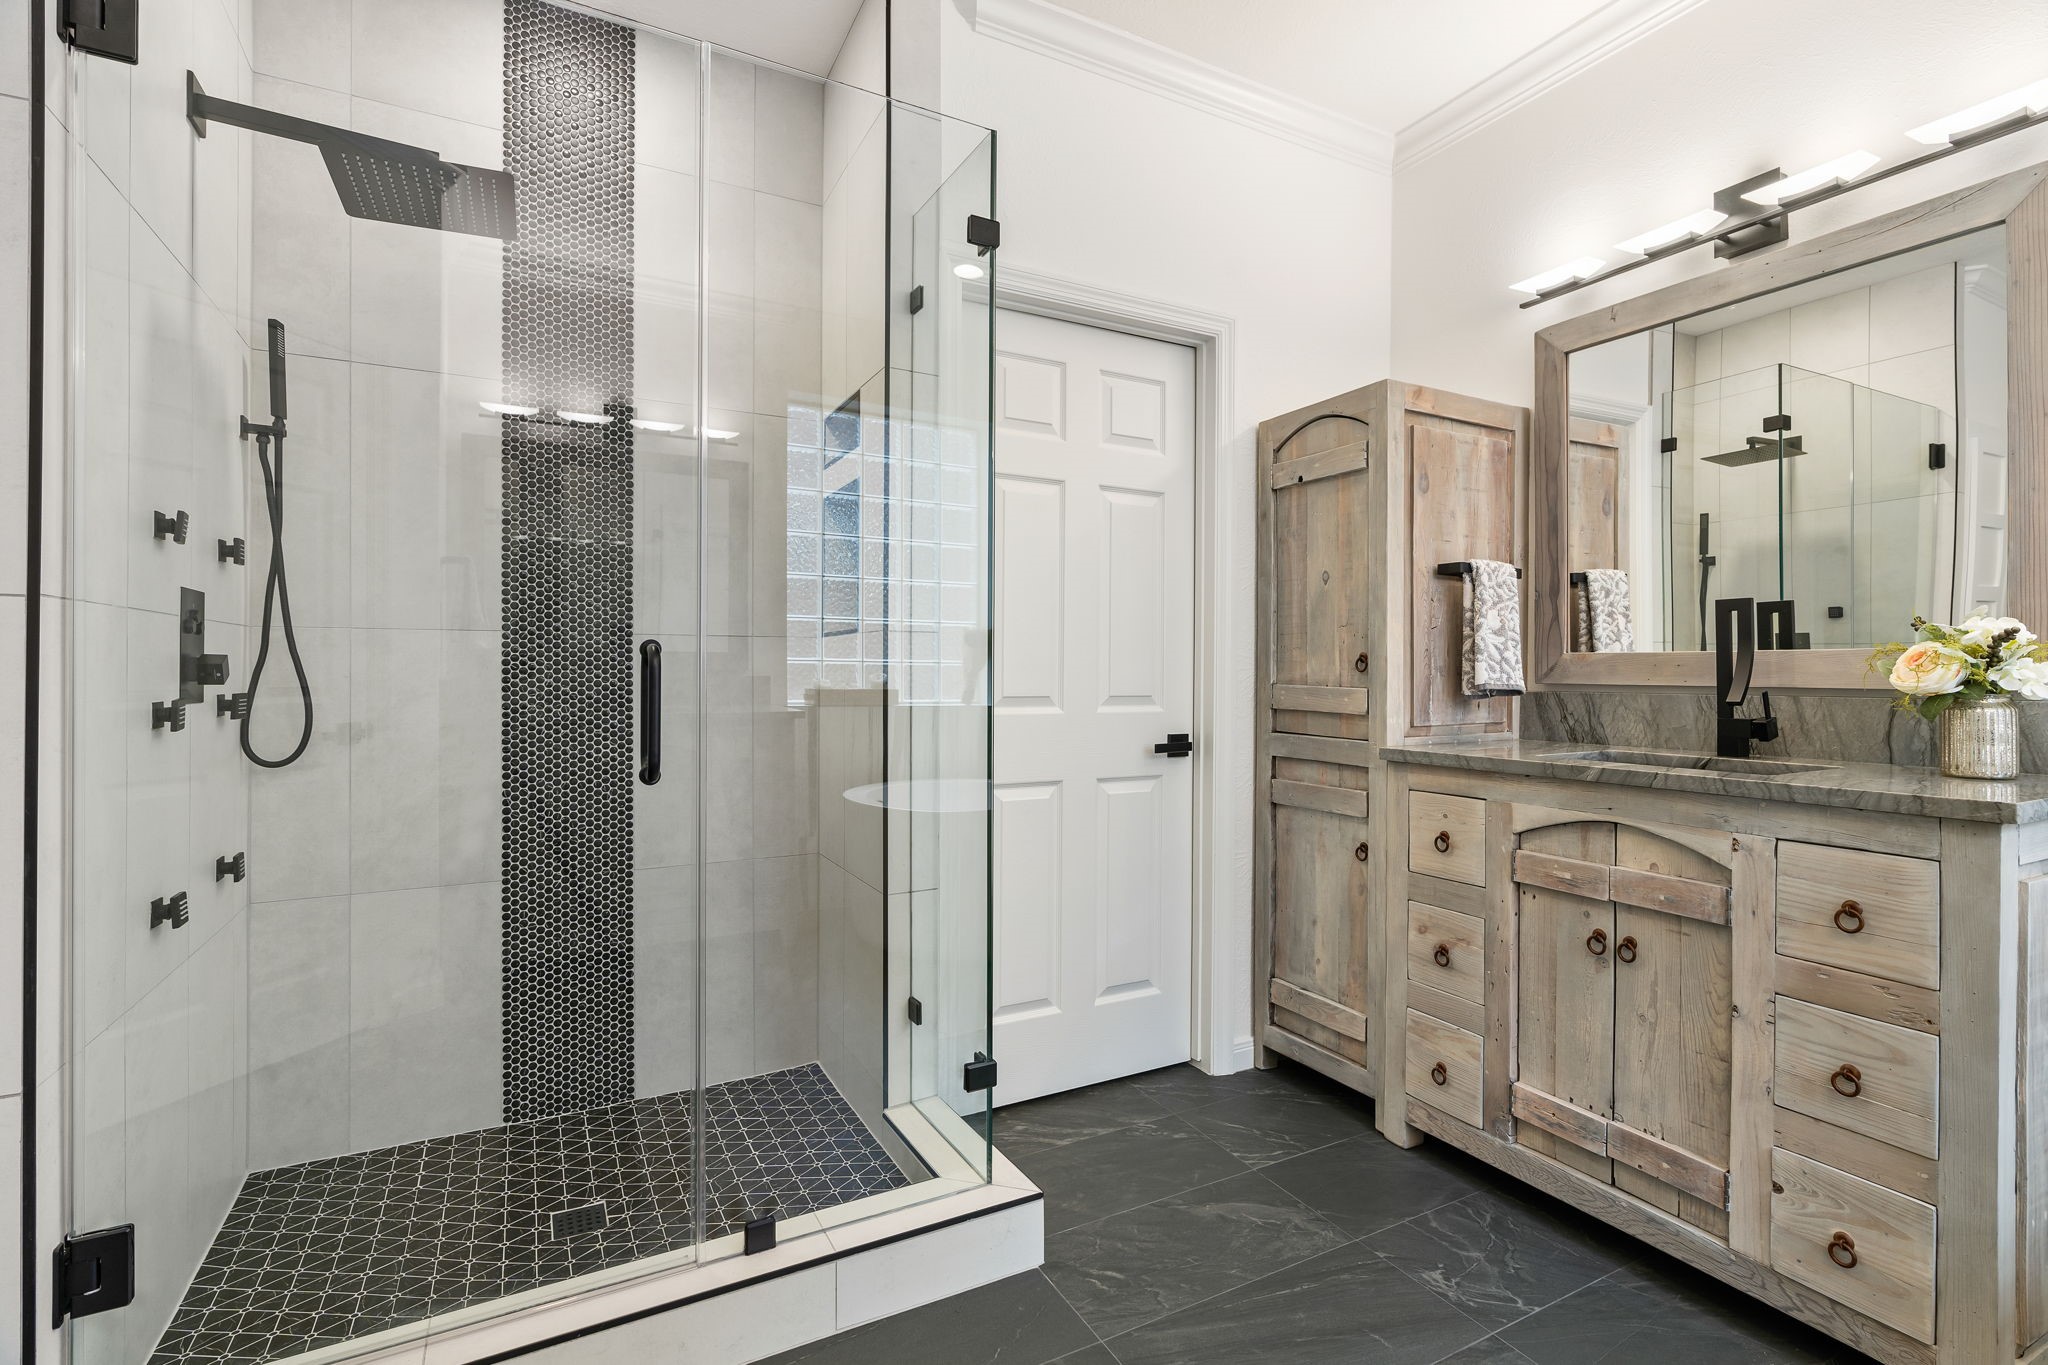 The shower was expanded and look how beautiful it is!  Complete with a rain shower and body jets.  The expansion did not compromise the storage in this bath.